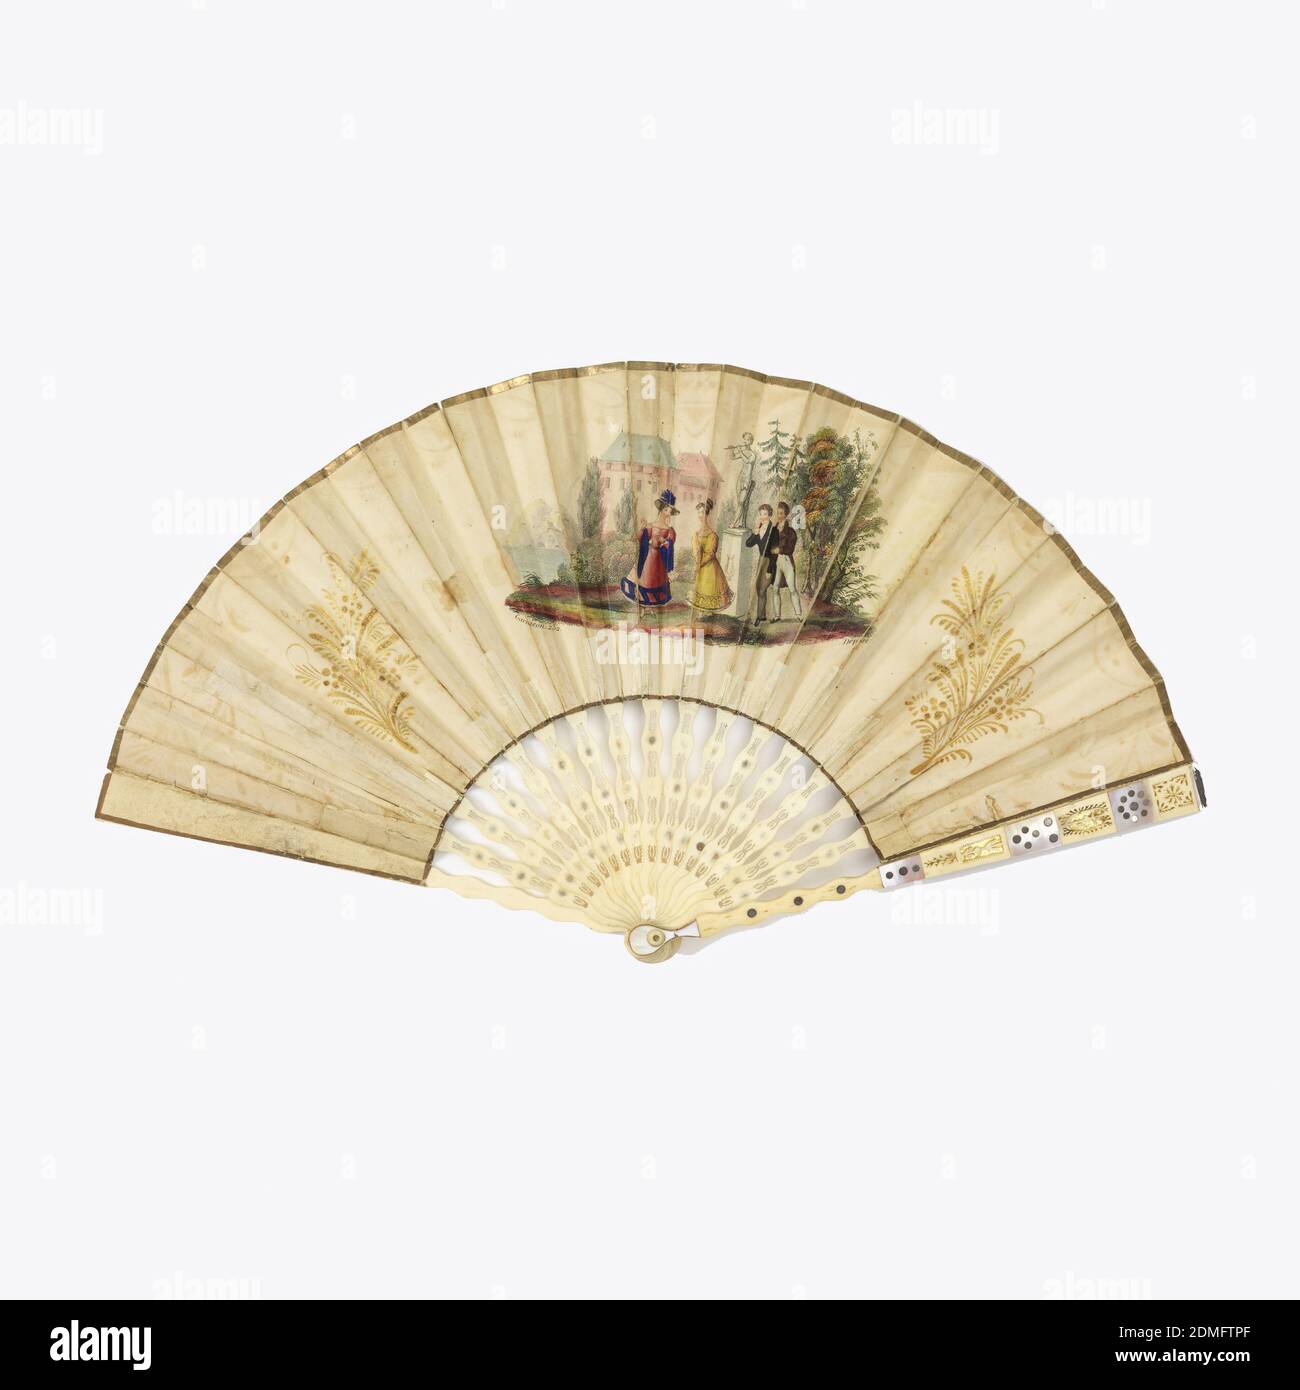 Pleated fan, Gilded paper leaf with hand-colored lithograph, pierced ivory sticks with spangles and mother-of-pearl plaques, Pleated fan. Gilded paper leaf with hand-colored lithograph. Obverse: a finely dressed man and woman meeting two rustic women on an island. Reverse: Two men and two women around a statue. Pierced ivory sticks with spangles and mother-of-pearl plaques., France, ca. 1830, costume & accessories, Pleated fan Stock Photo